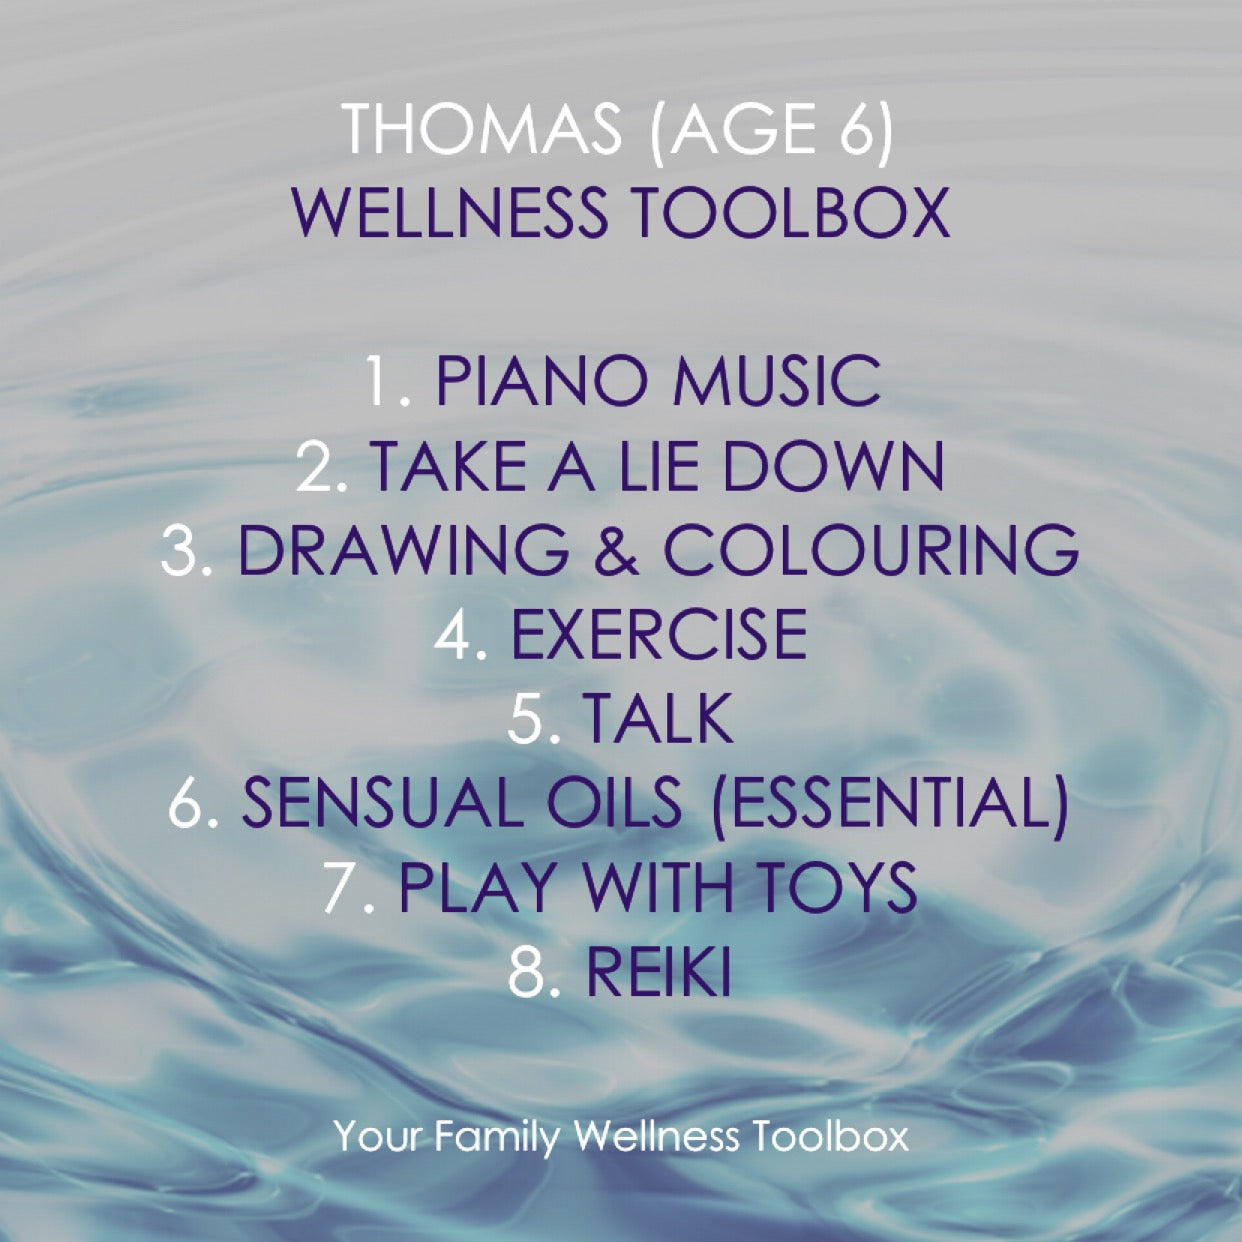 WHAT IS IN THOMAS (AGE 6) WELLNESS TOOLBOX?